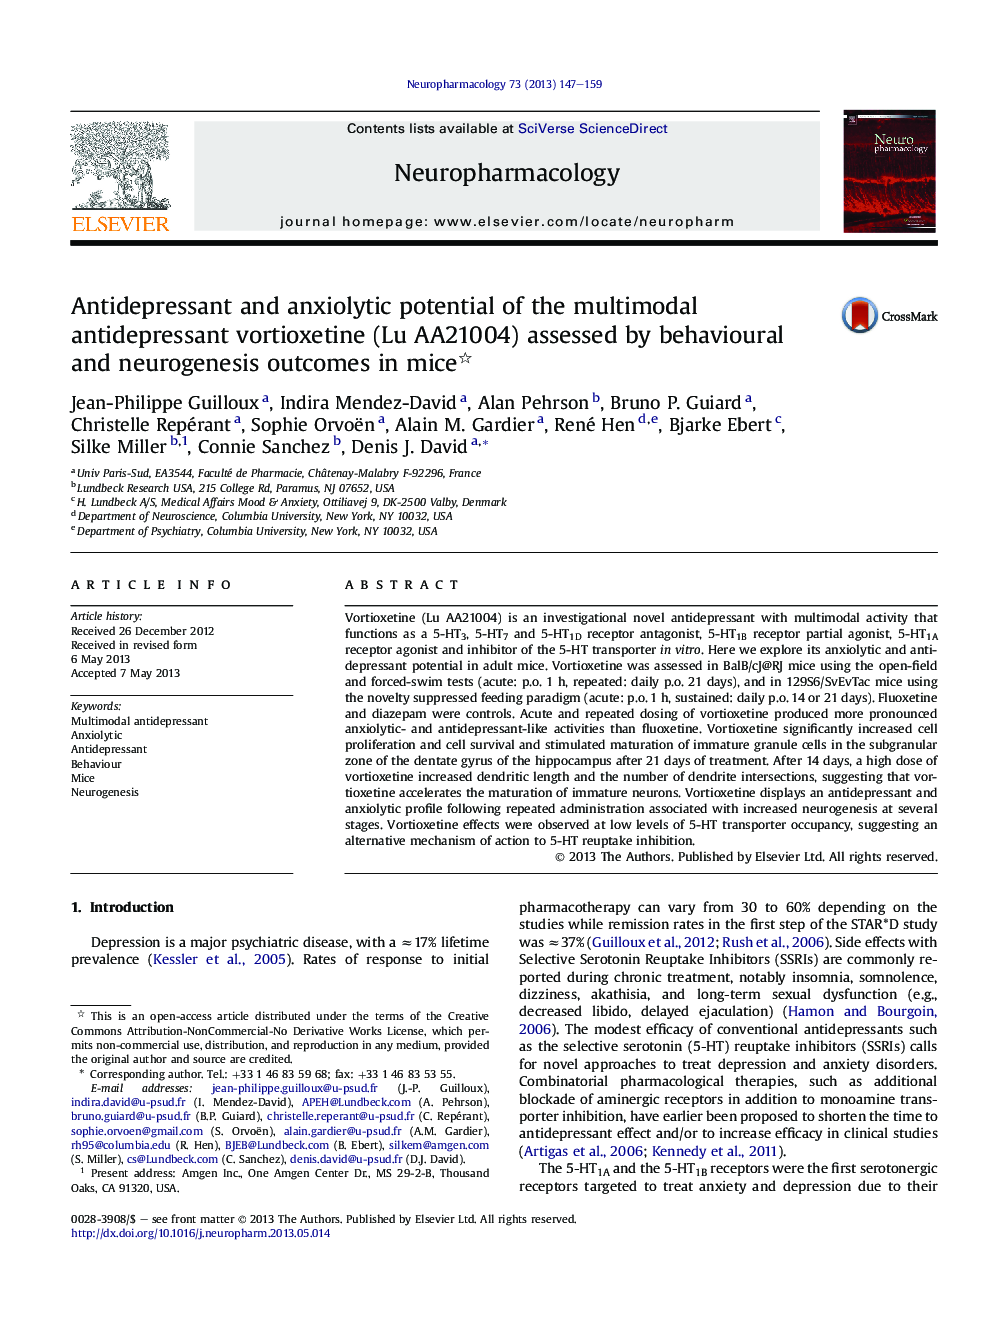 Antidepressant and anxiolytic potential of the multimodal antidepressant vortioxetine (Lu AA21004) assessed by behavioural and neurogenesis outcomes in mice